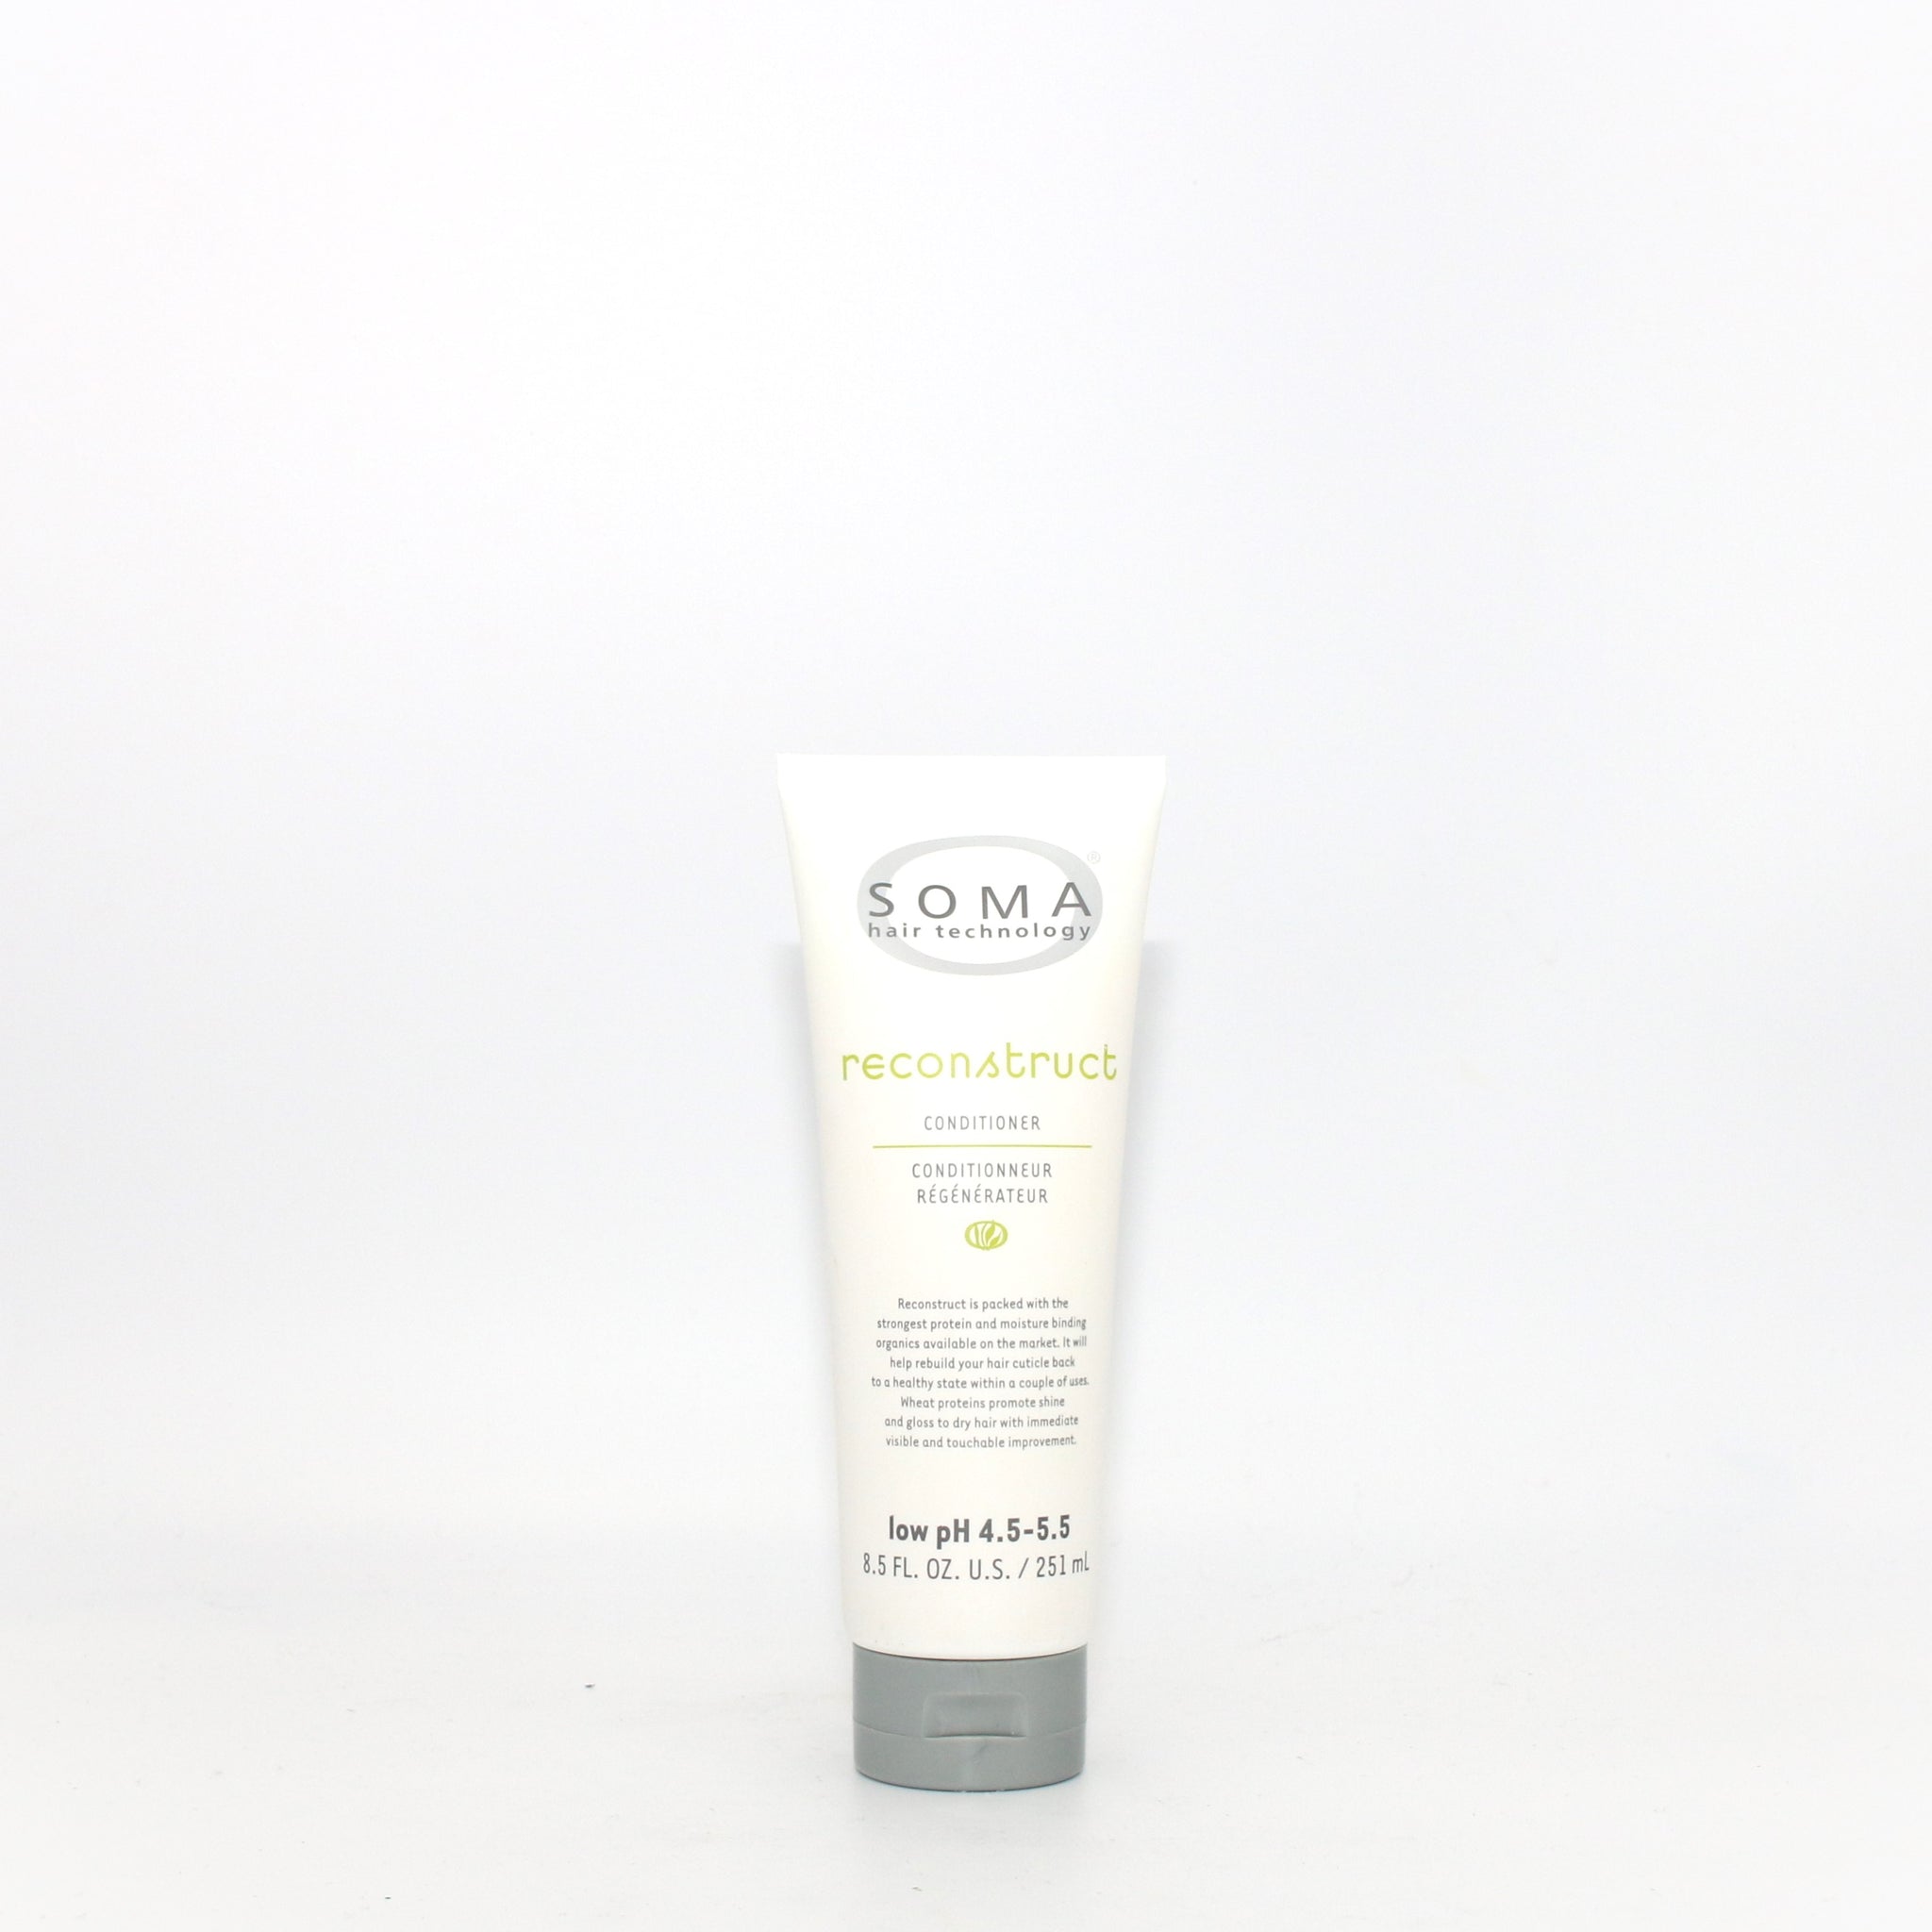 SOMA Hair Technology Reconstruct Conditioner 8.5 oz